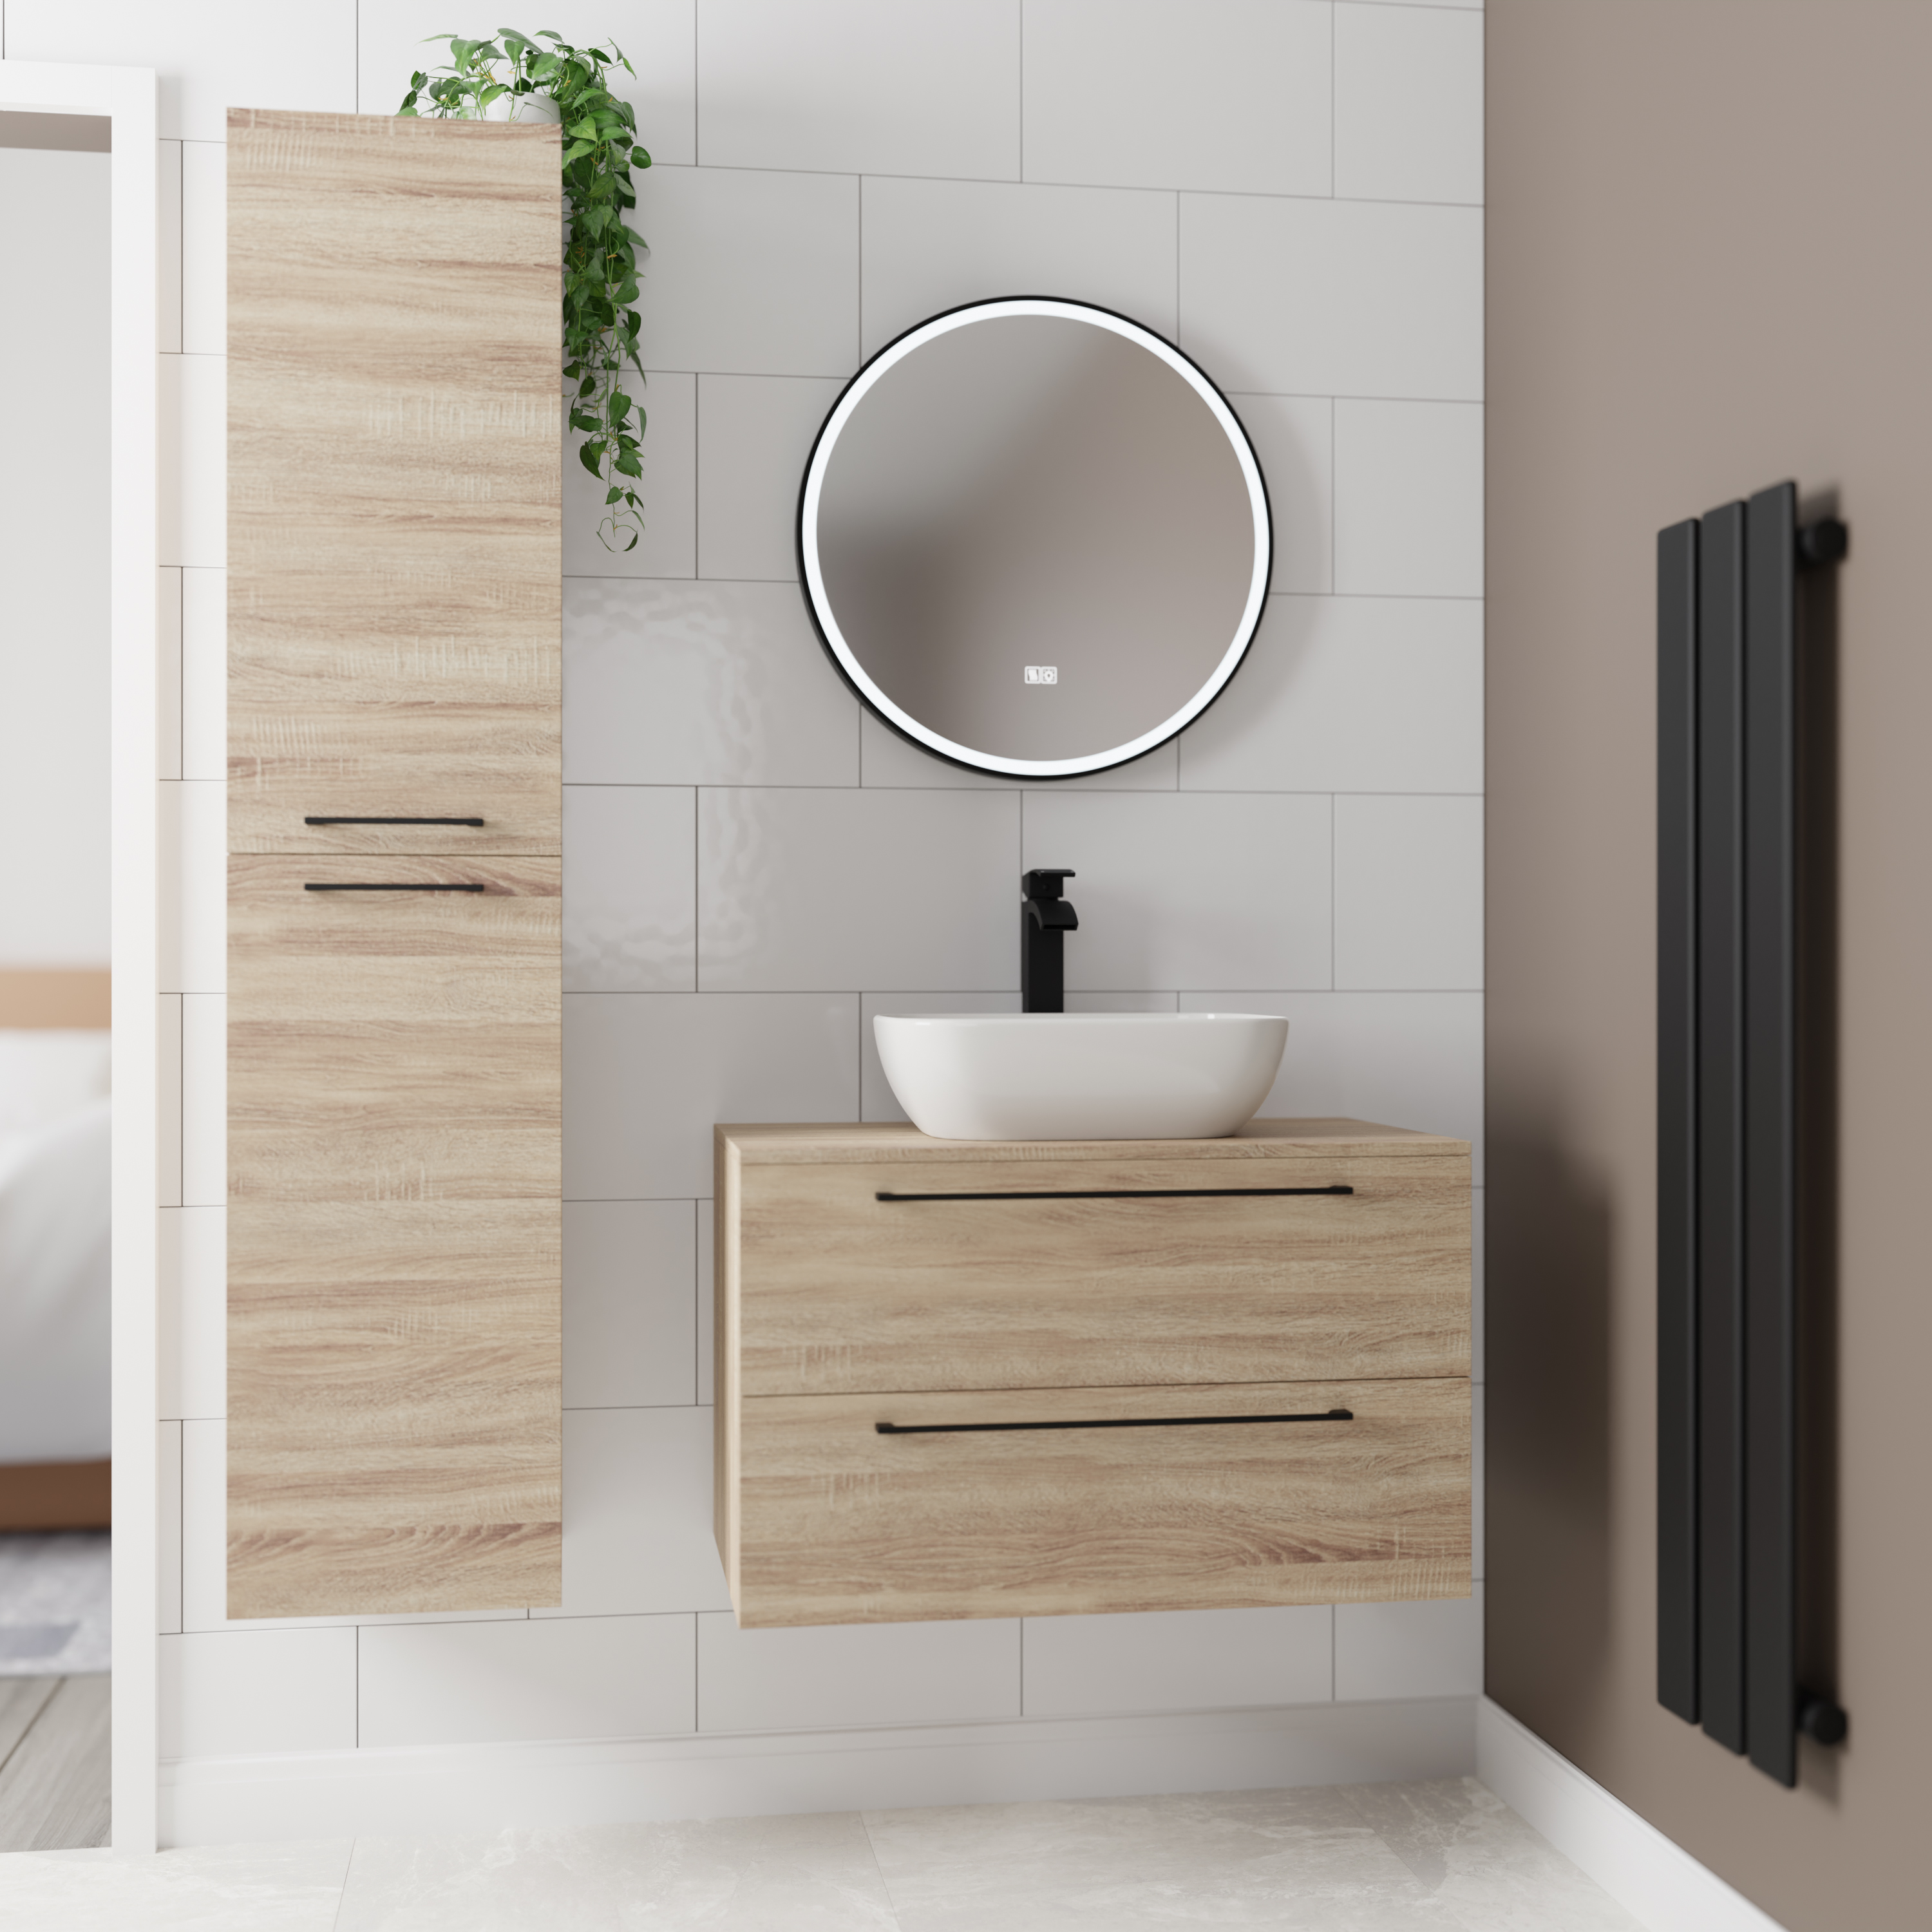 Wall hung storage solutions with countertop basin and slim anthracite radiator on wall